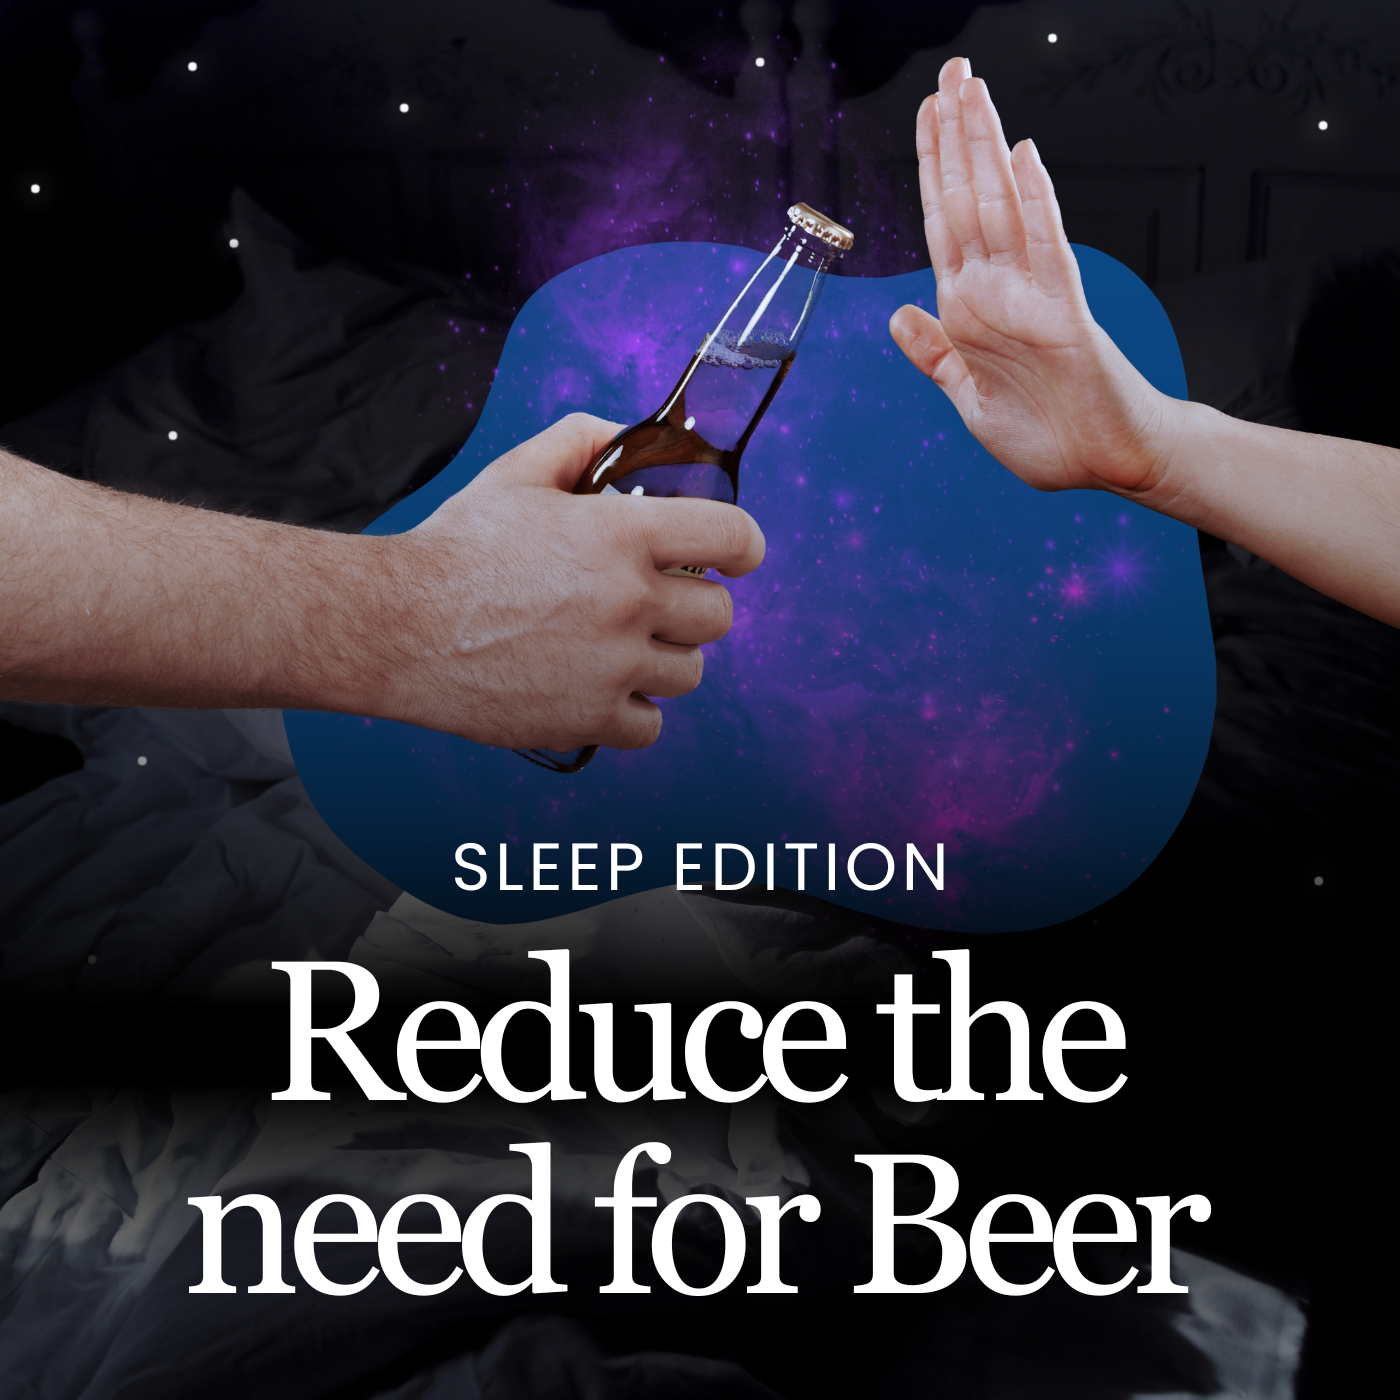 Reduce the need for Beer hypnotherapy - Sleep Edition